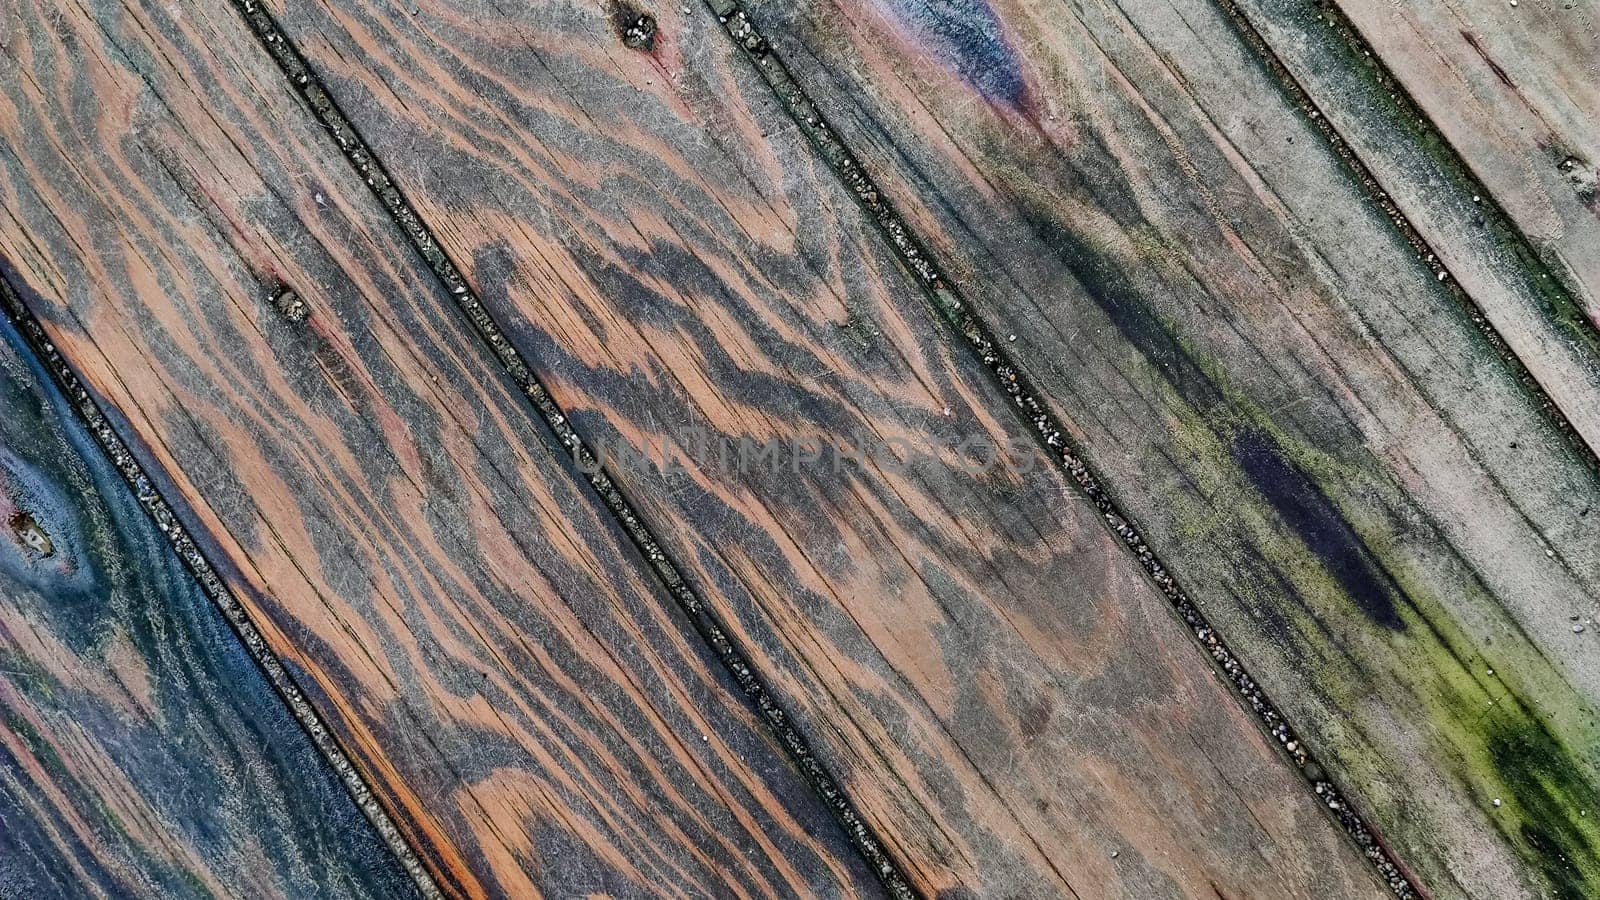 Wooden surface made of boards with multicolored spots from humidity, diagonal lines, top view, close-up by Laguna781